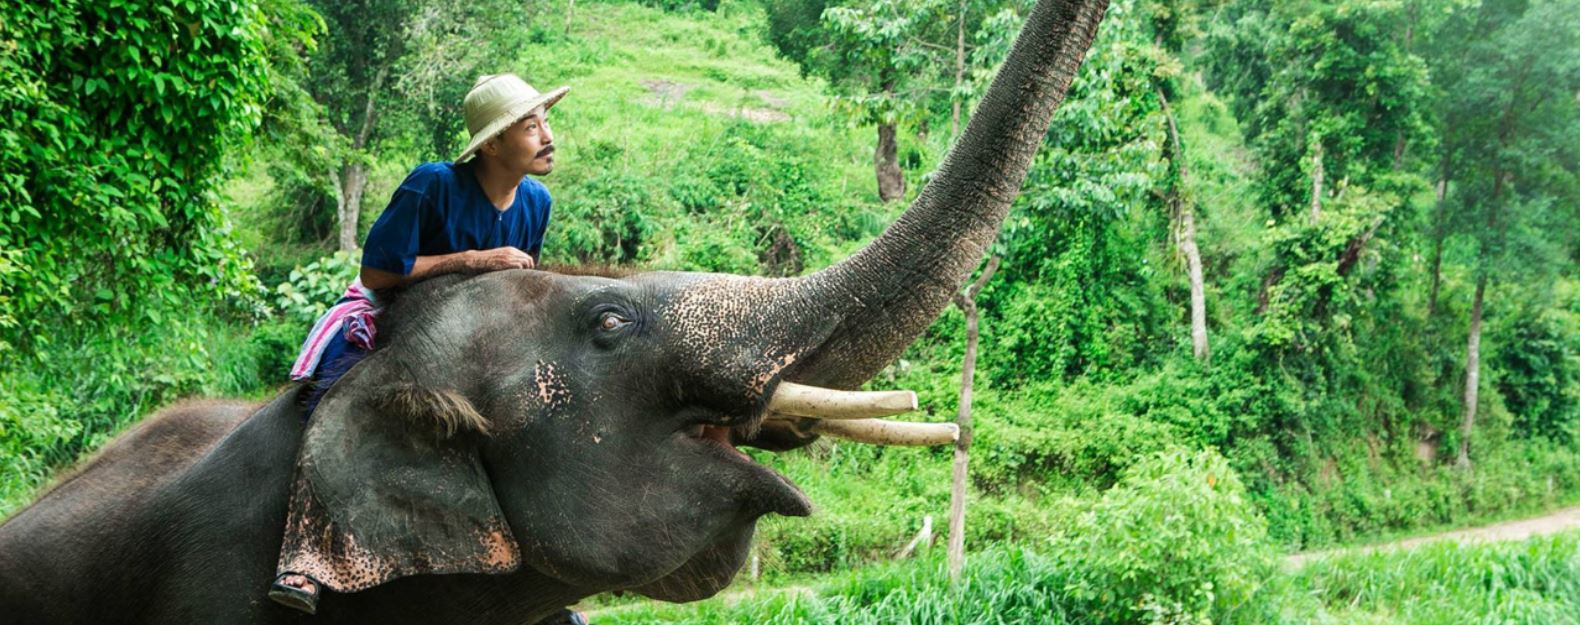 mahout travel agent